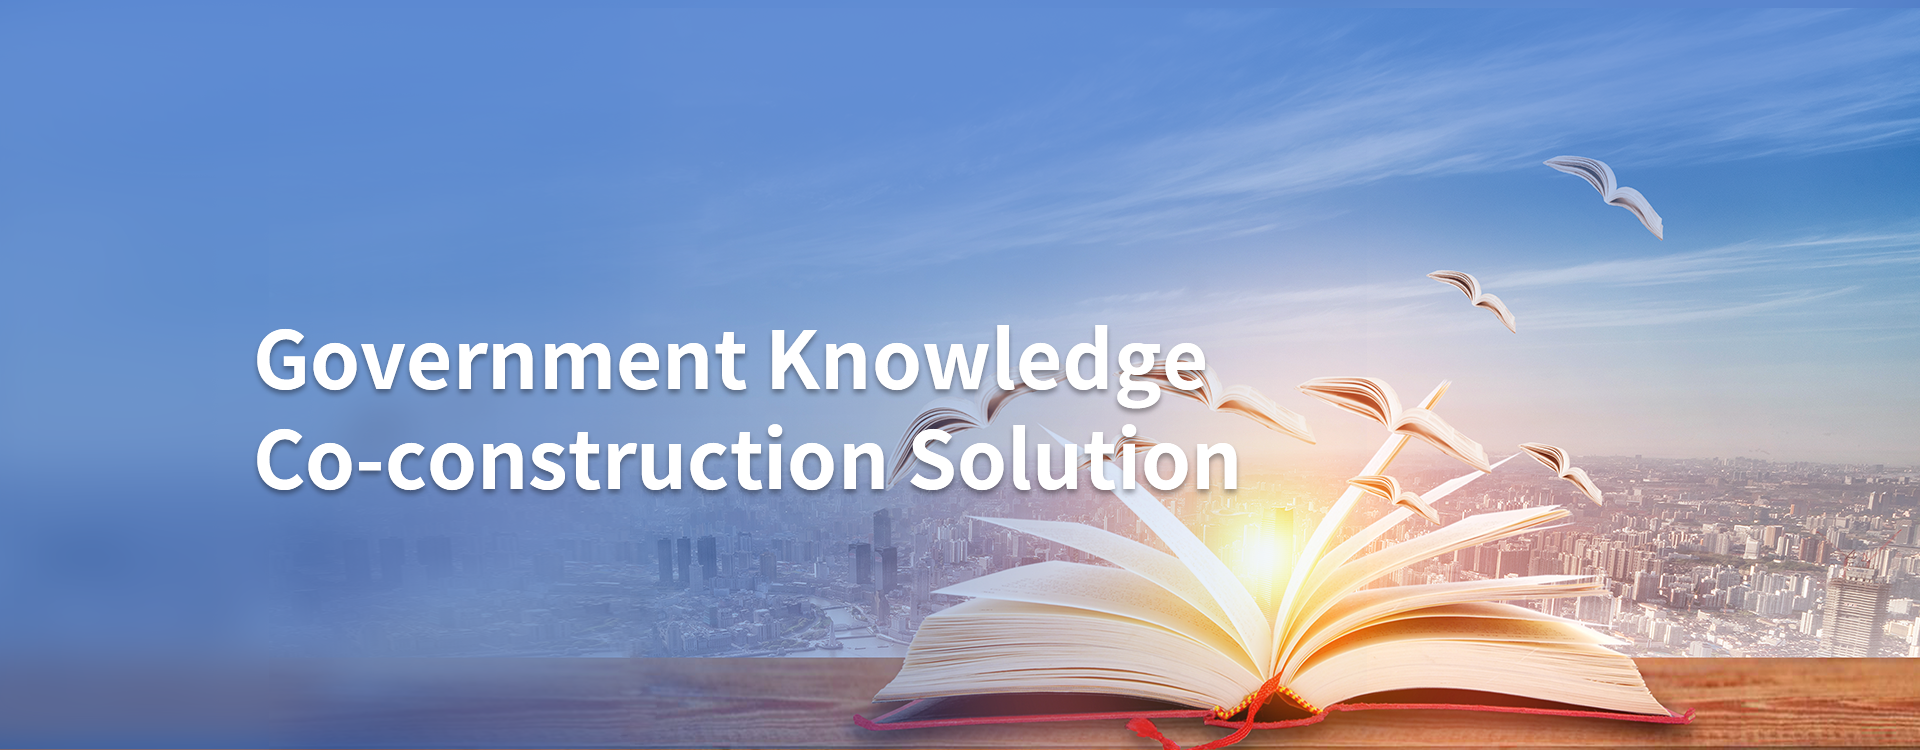  Government Knowledge Co-construction